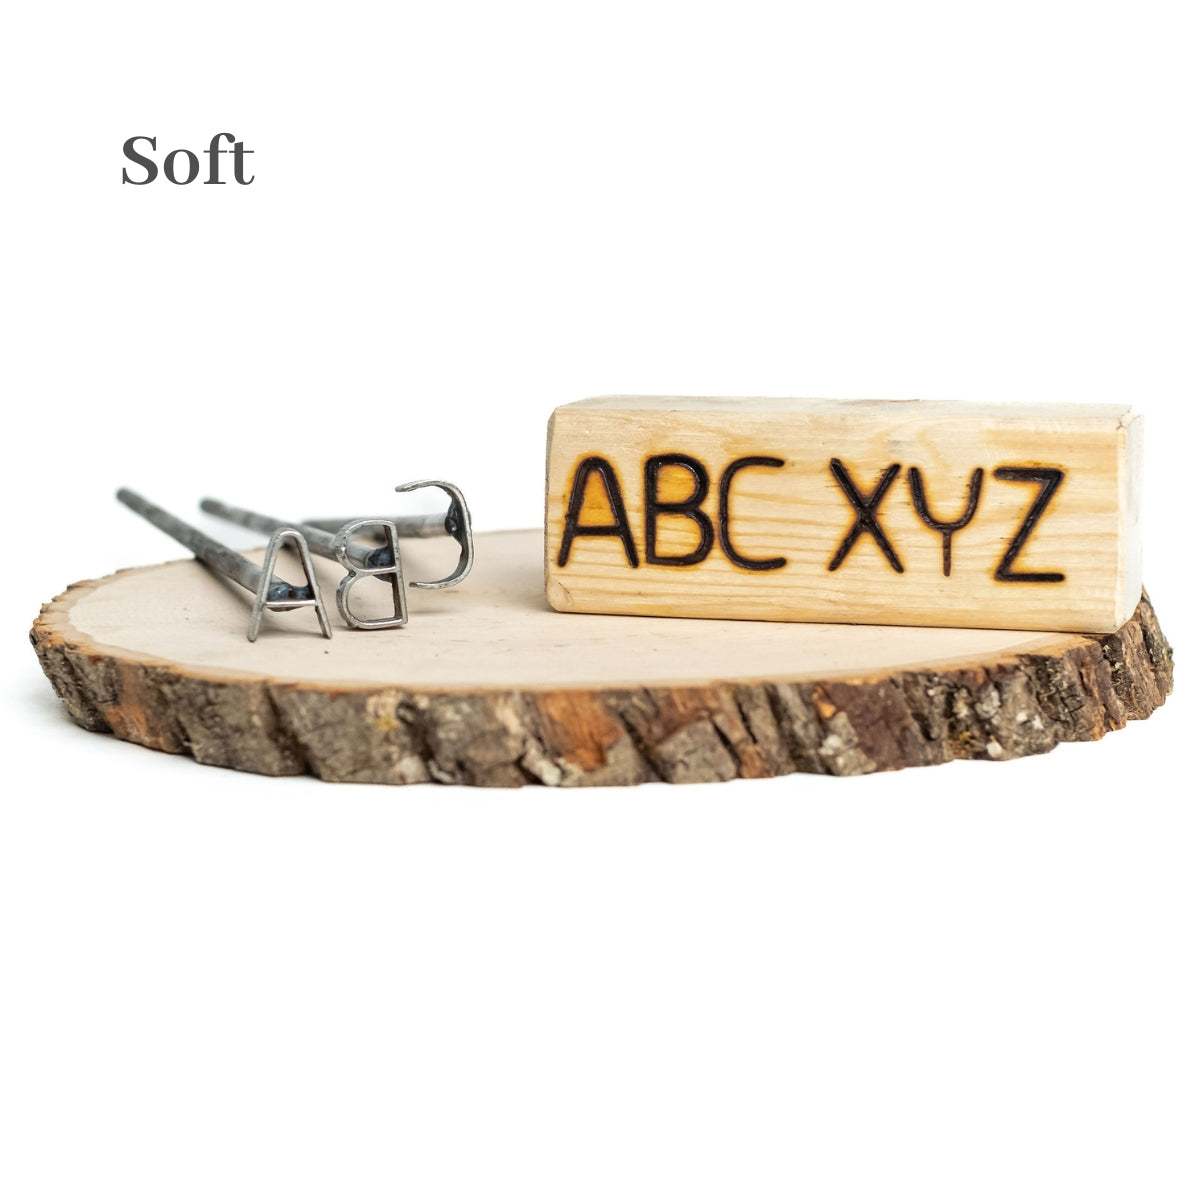 A-Z Alphabet Branding Irons - 3/4" Tall  - 26 Letters - 8" Straight Steel Handles - BBQ, Woodworking, Crafts, Monogram - The Heritage Forge